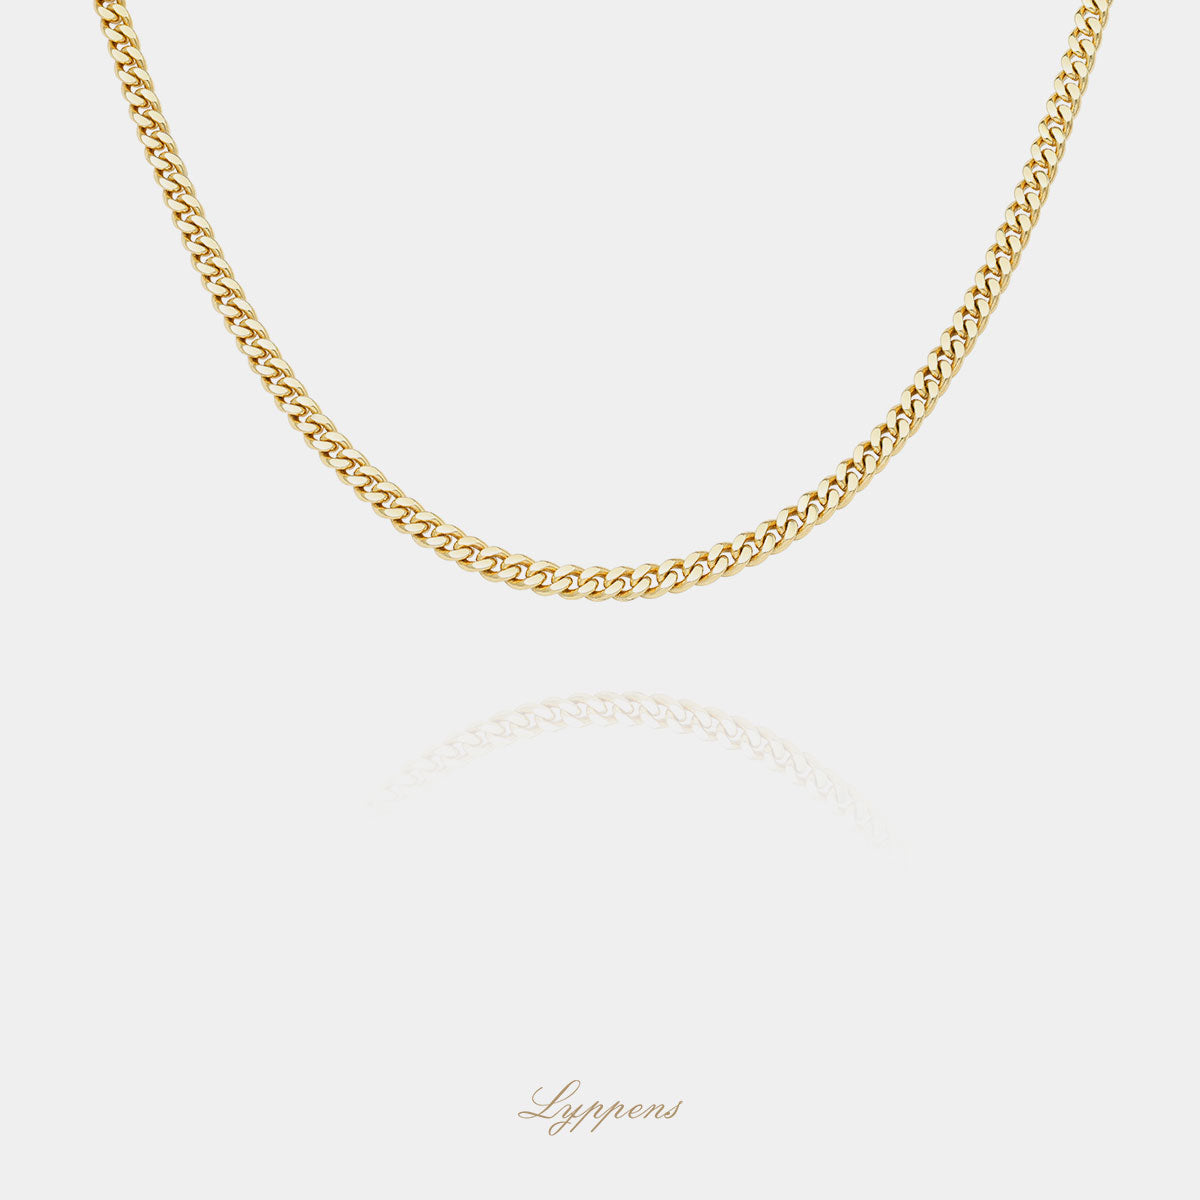 Yellow gold gourmet link necklace